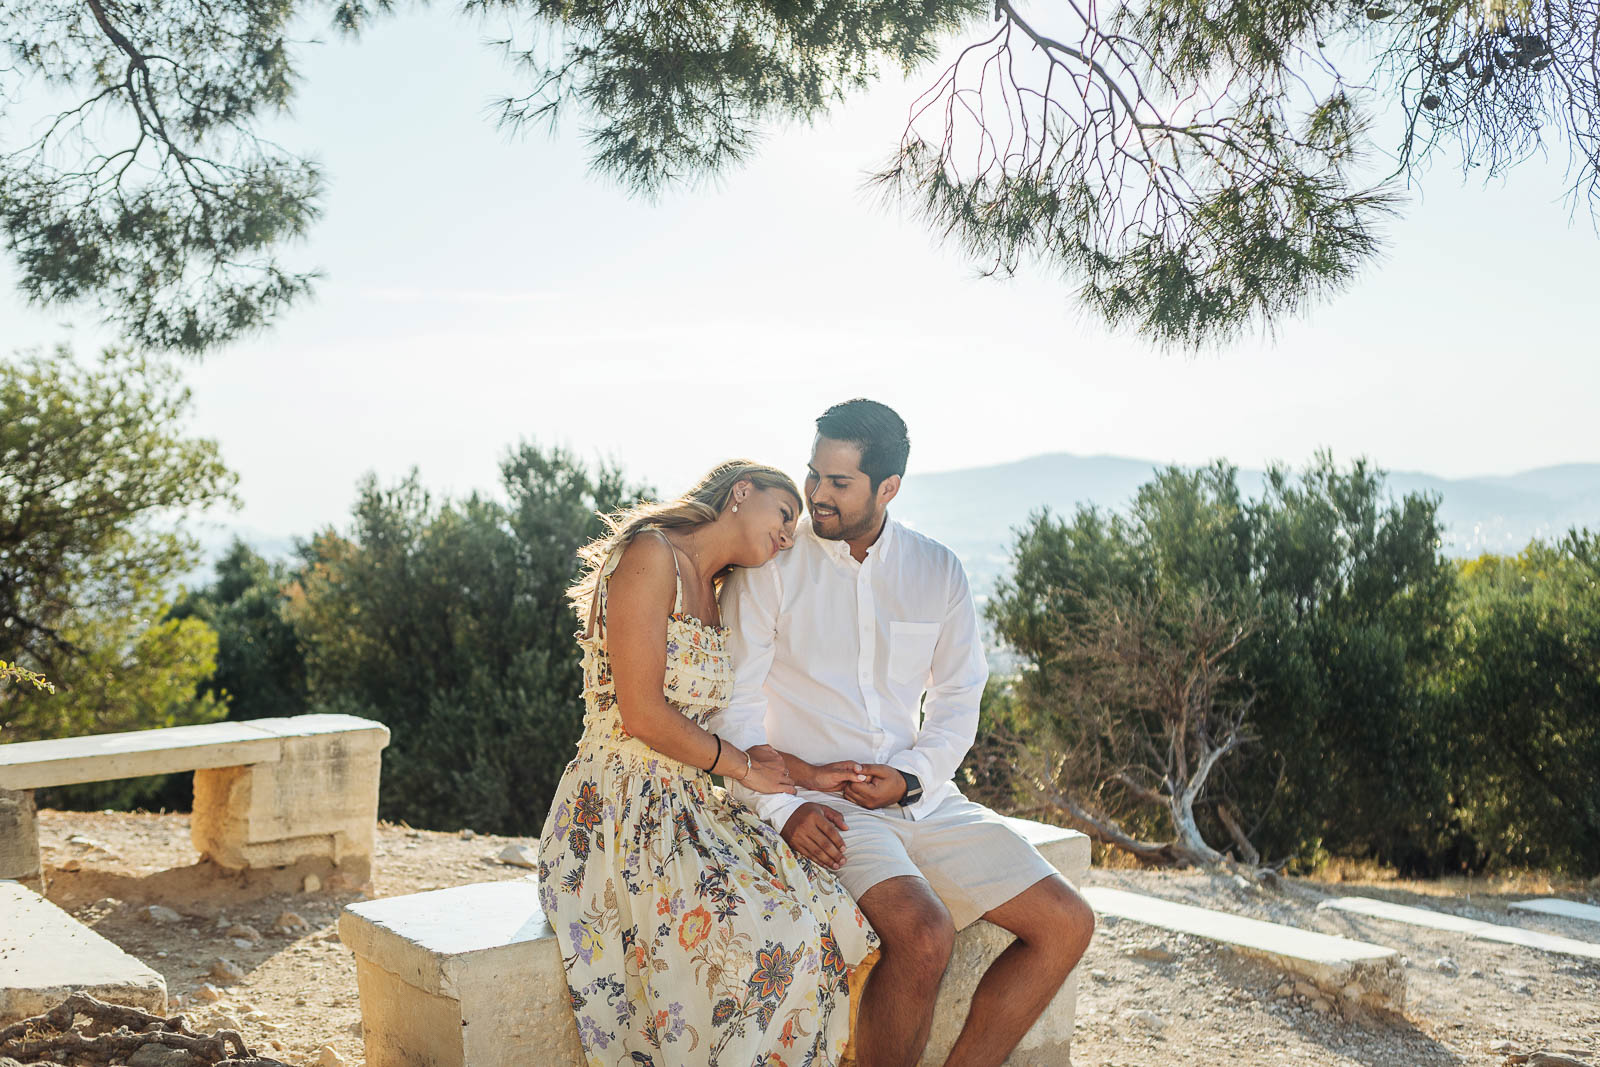 Marriage proposal photo session in Athens